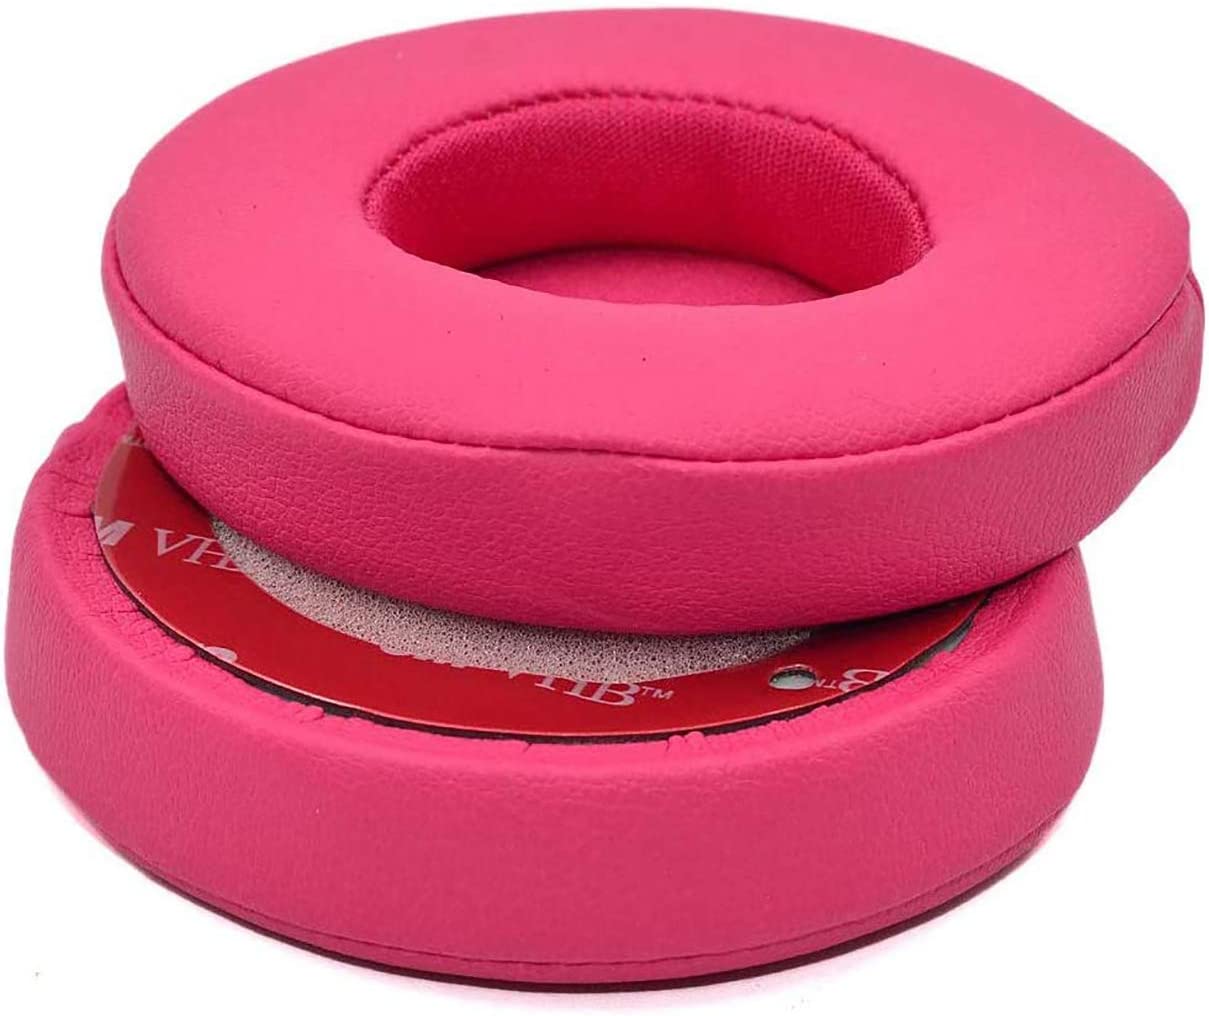 Aiivioll Replacement Earpads Replacement Earpads Solo 2.0 3.0 Wireless Ear Pad Ear Cushion Ear Cups Compatible with Solo 2.0 3.0 Wireless Headphone (Pink) - image 3 of 3